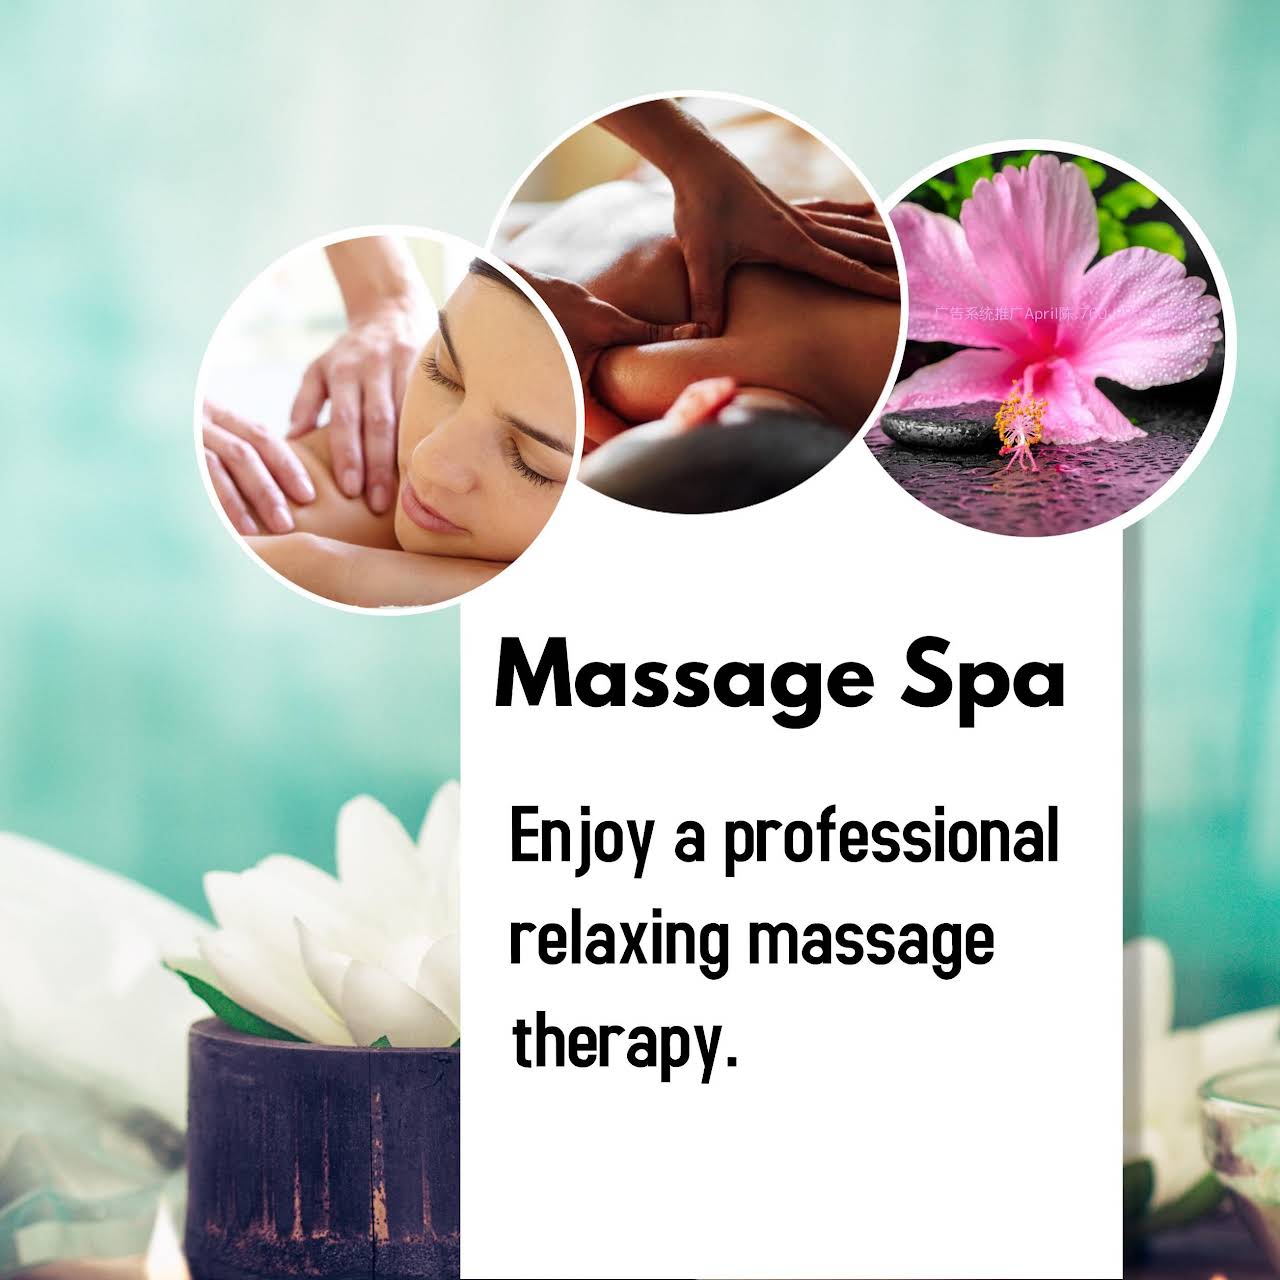 Mei Spa Massage Massage Spa In Myrtle Beach Call Us To Make An Appointment 